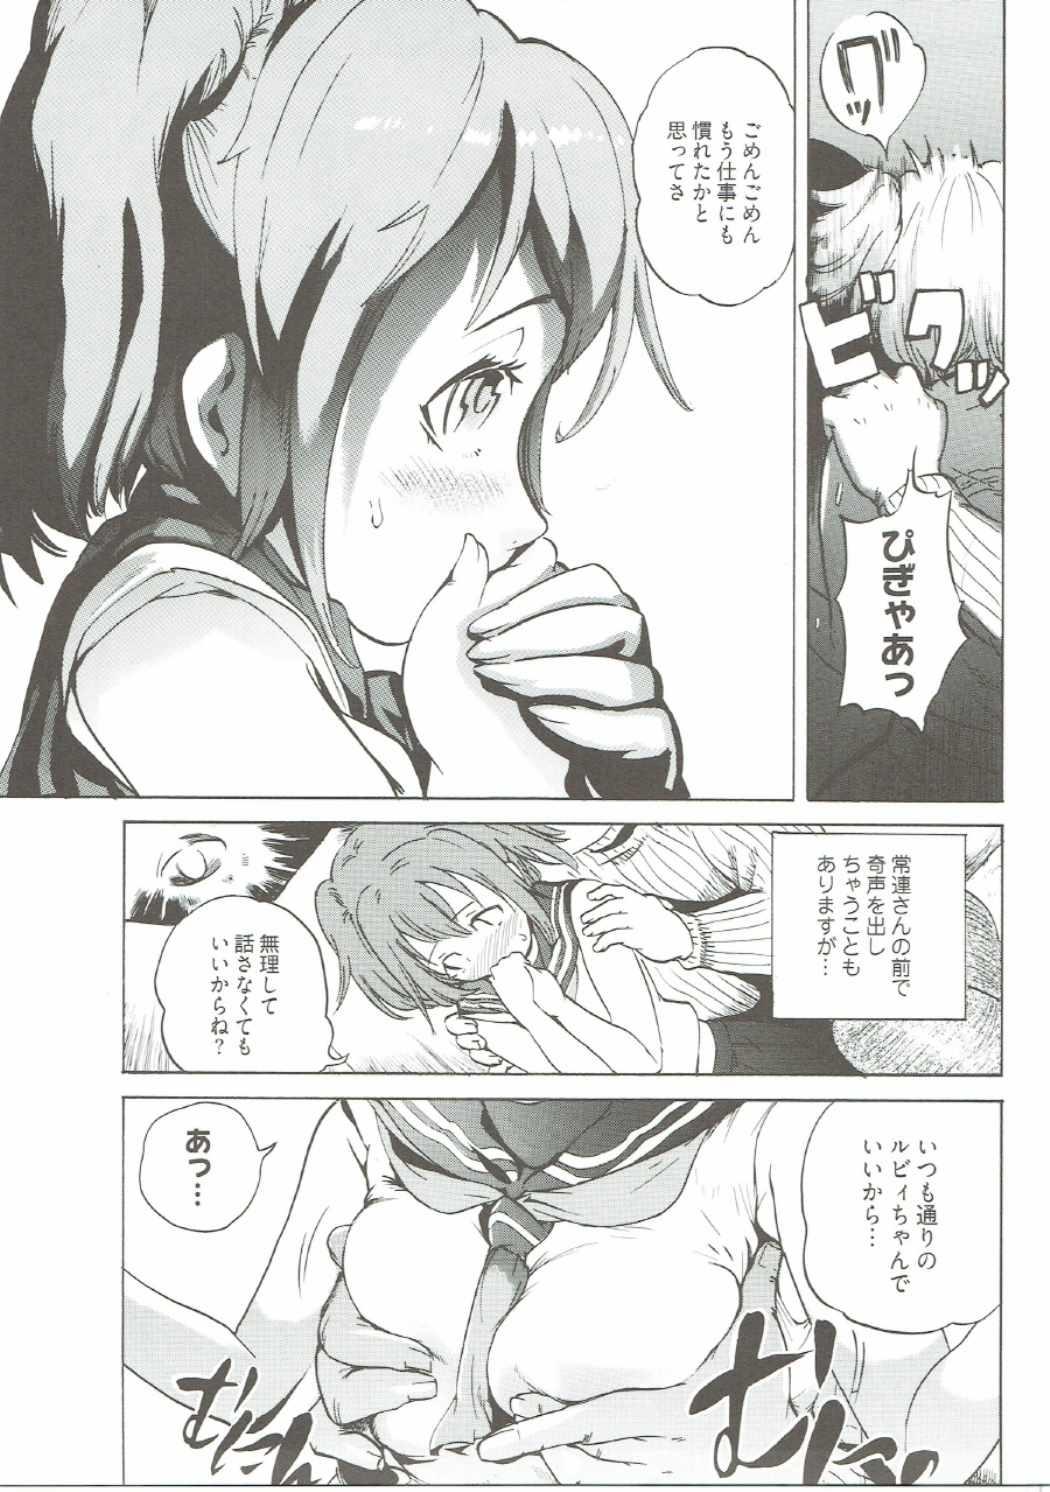 Hair AnaRuby - Love live sunshine Point Of View - Page 4